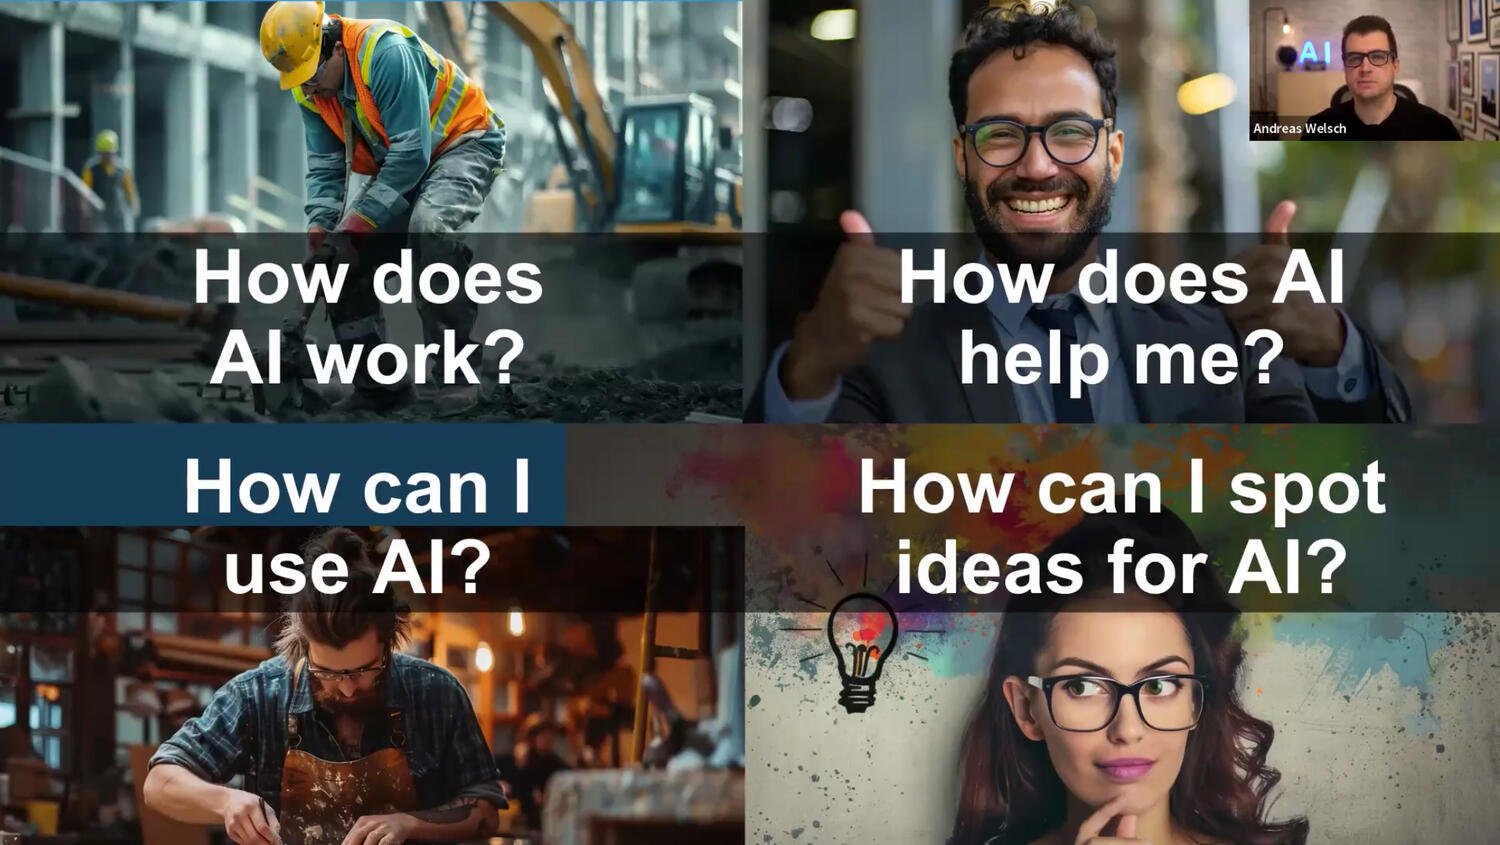 Realize AI value faster across your business based on 23 years of global expertise working with 80+ Fortune 500 leaders. Leverage top expertise to incorporate AI into your processes and products with flexibility.